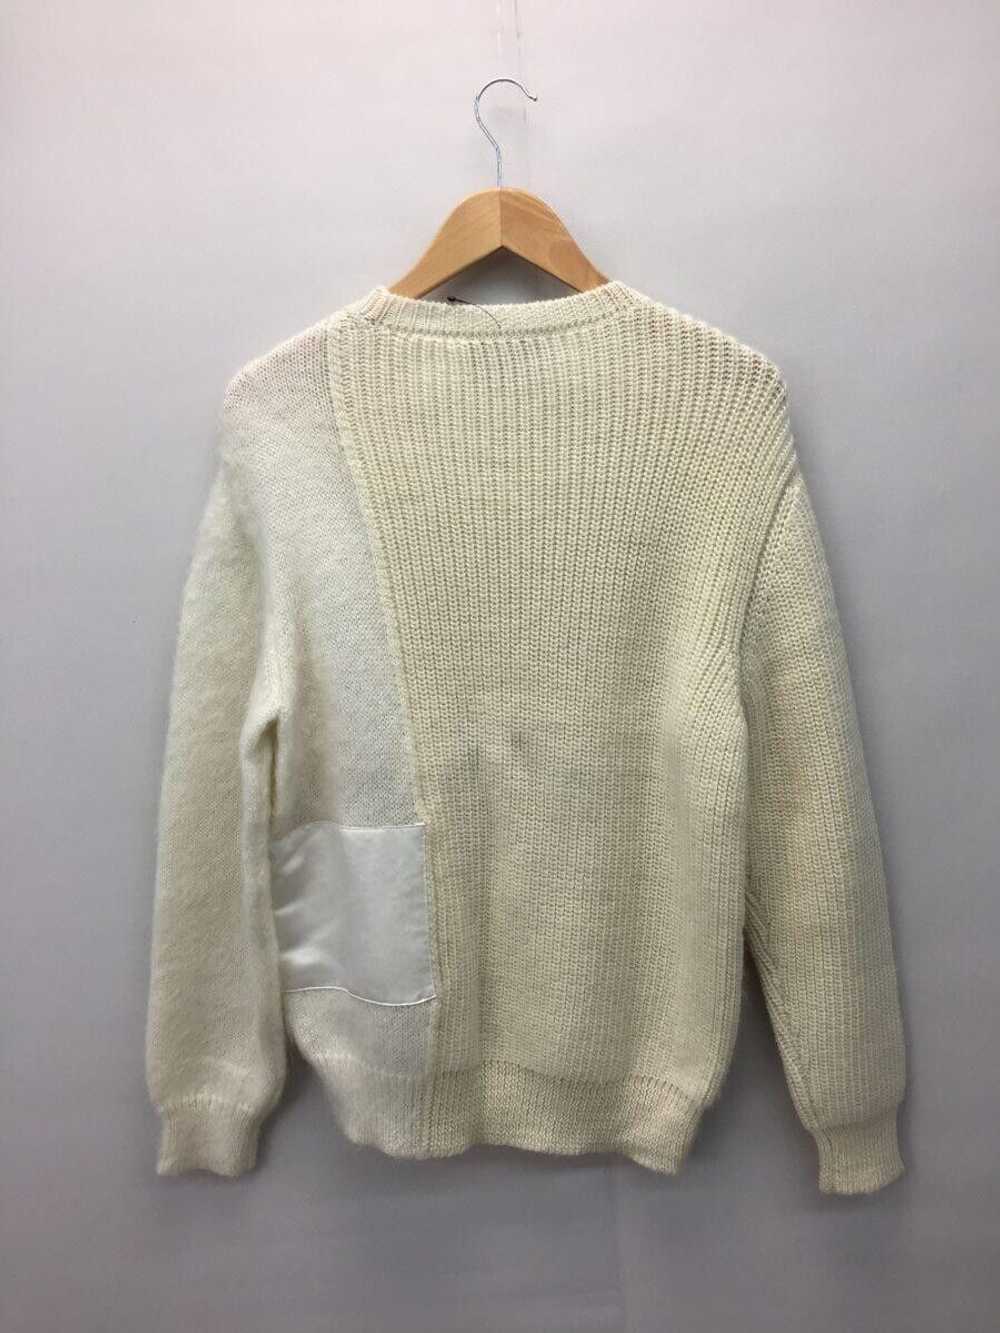 Undercover Hybrid Mohair Patchwork Knit Sweater - image 2